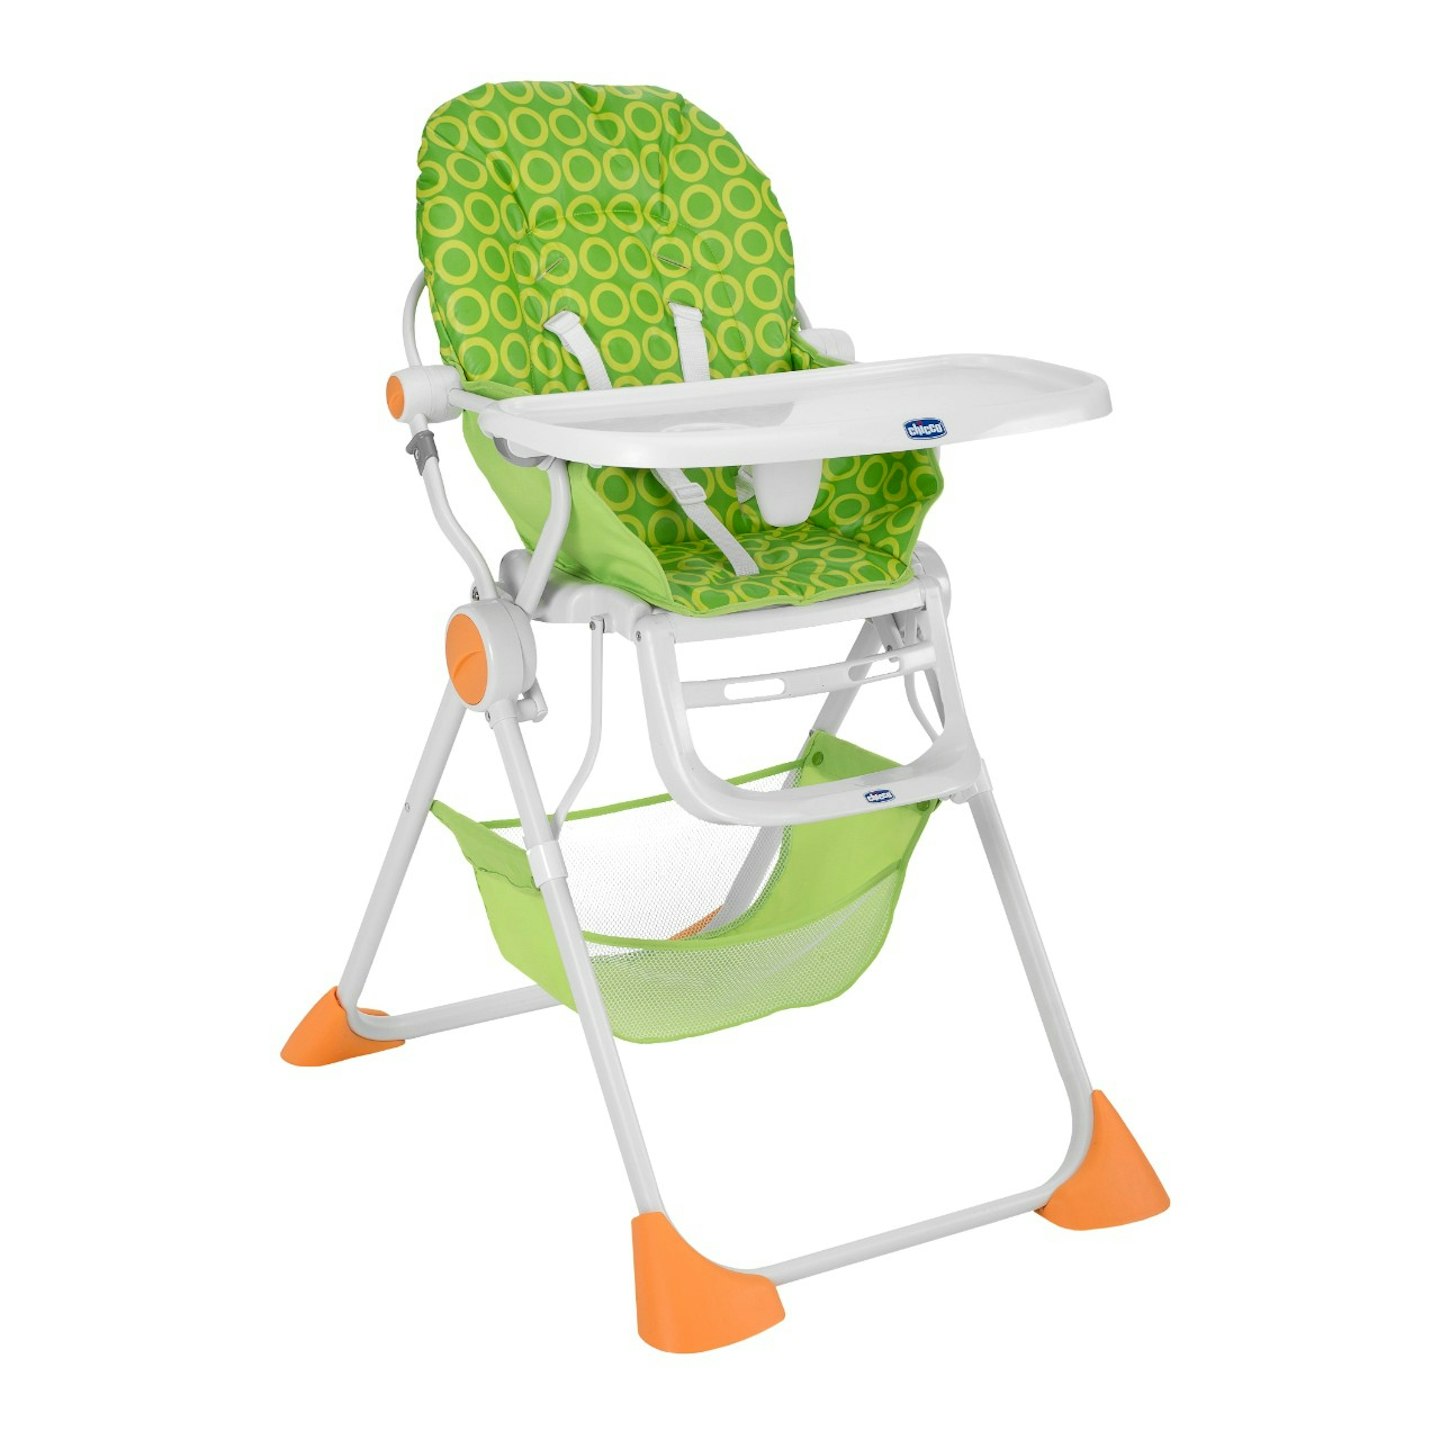 Chicco Pocket Lunch Highchair review